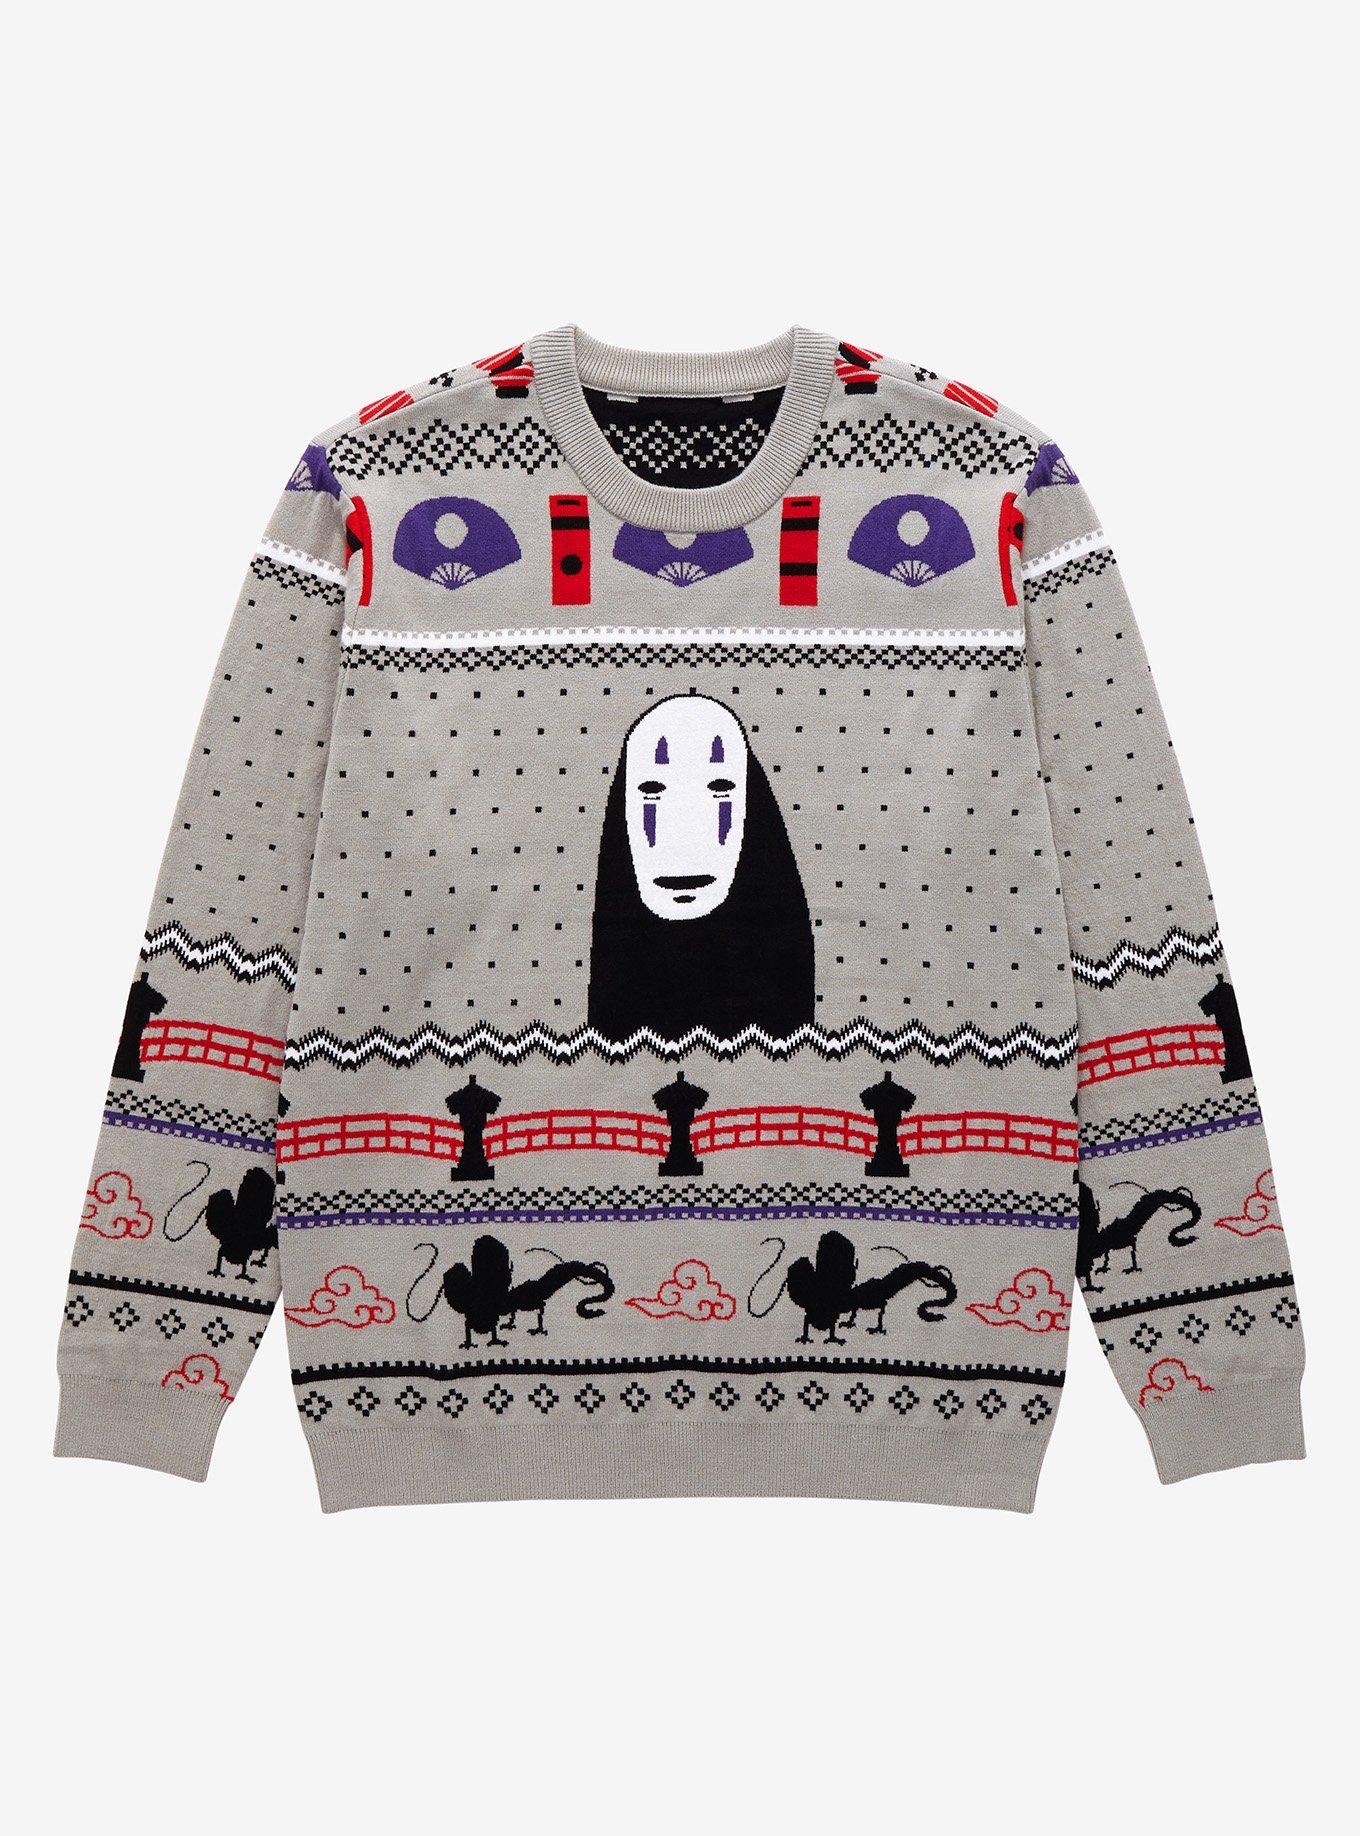 Her Universe Studio Ghibli Spirited Away No Face Holiday Sweater - BoxLunch Exclusive, GREY, hi-res